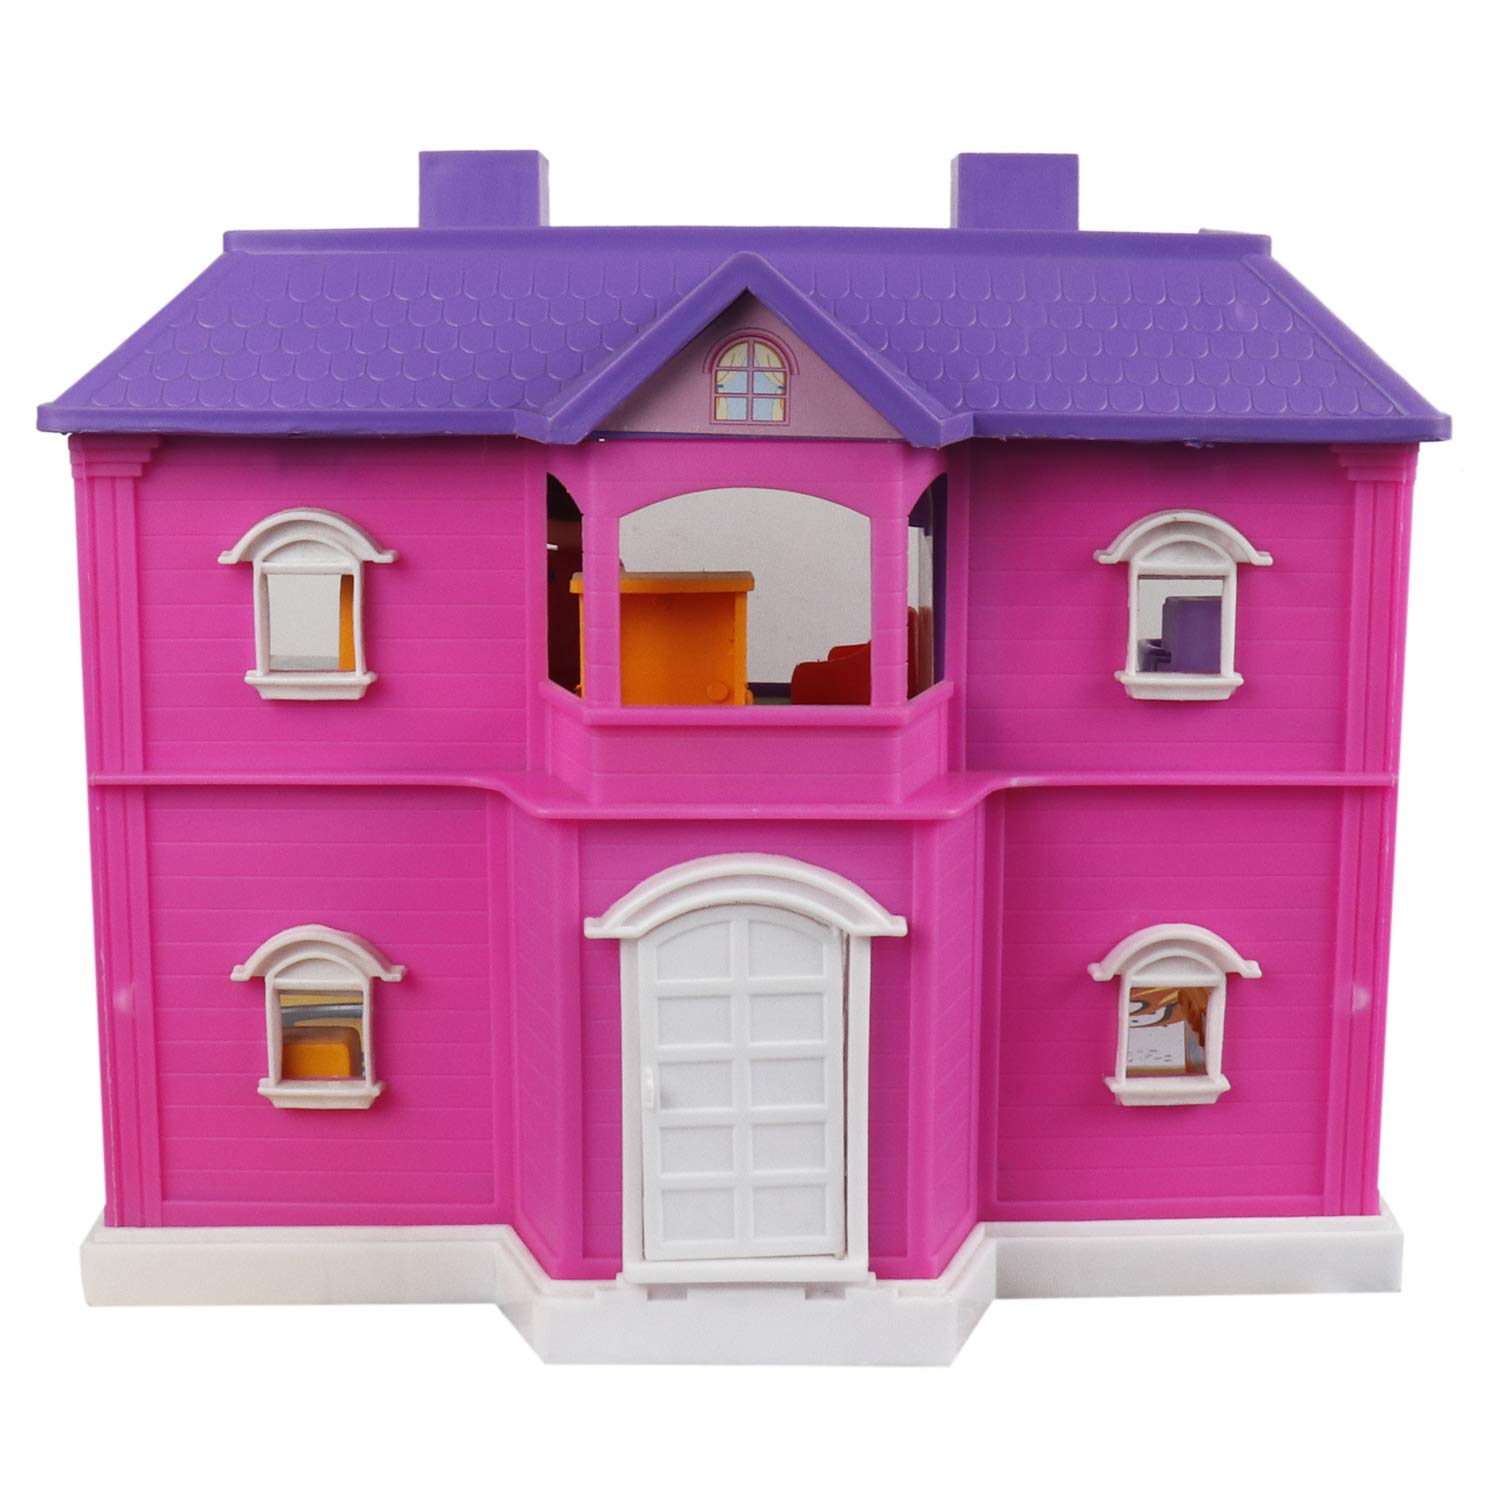 

doll house play set is cute house set is bound